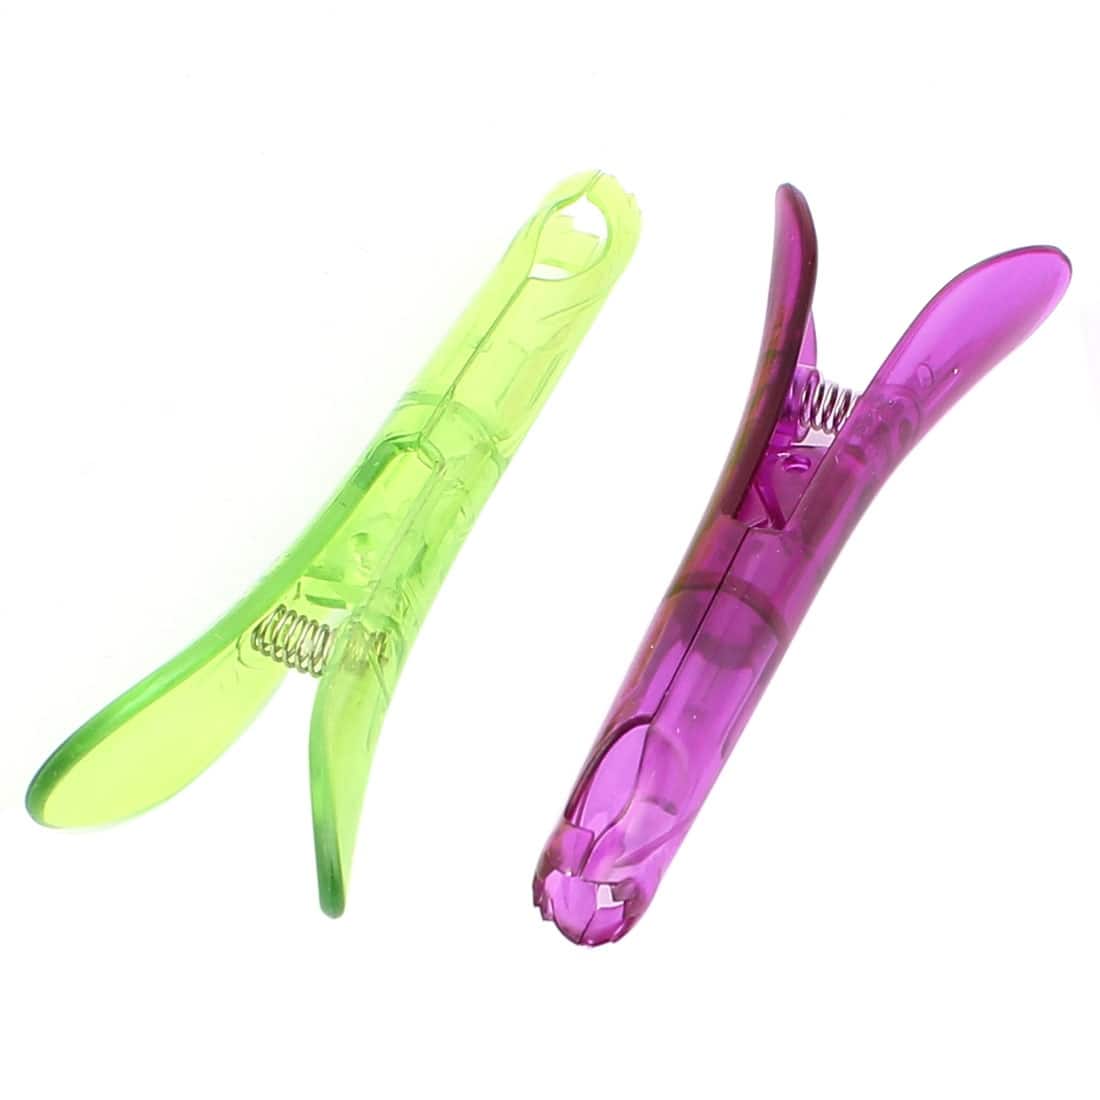 2pcs Plastic Spring Loaded Fruit Grape Cherry Seed Remover Corer - Clear Purple, Clear Green